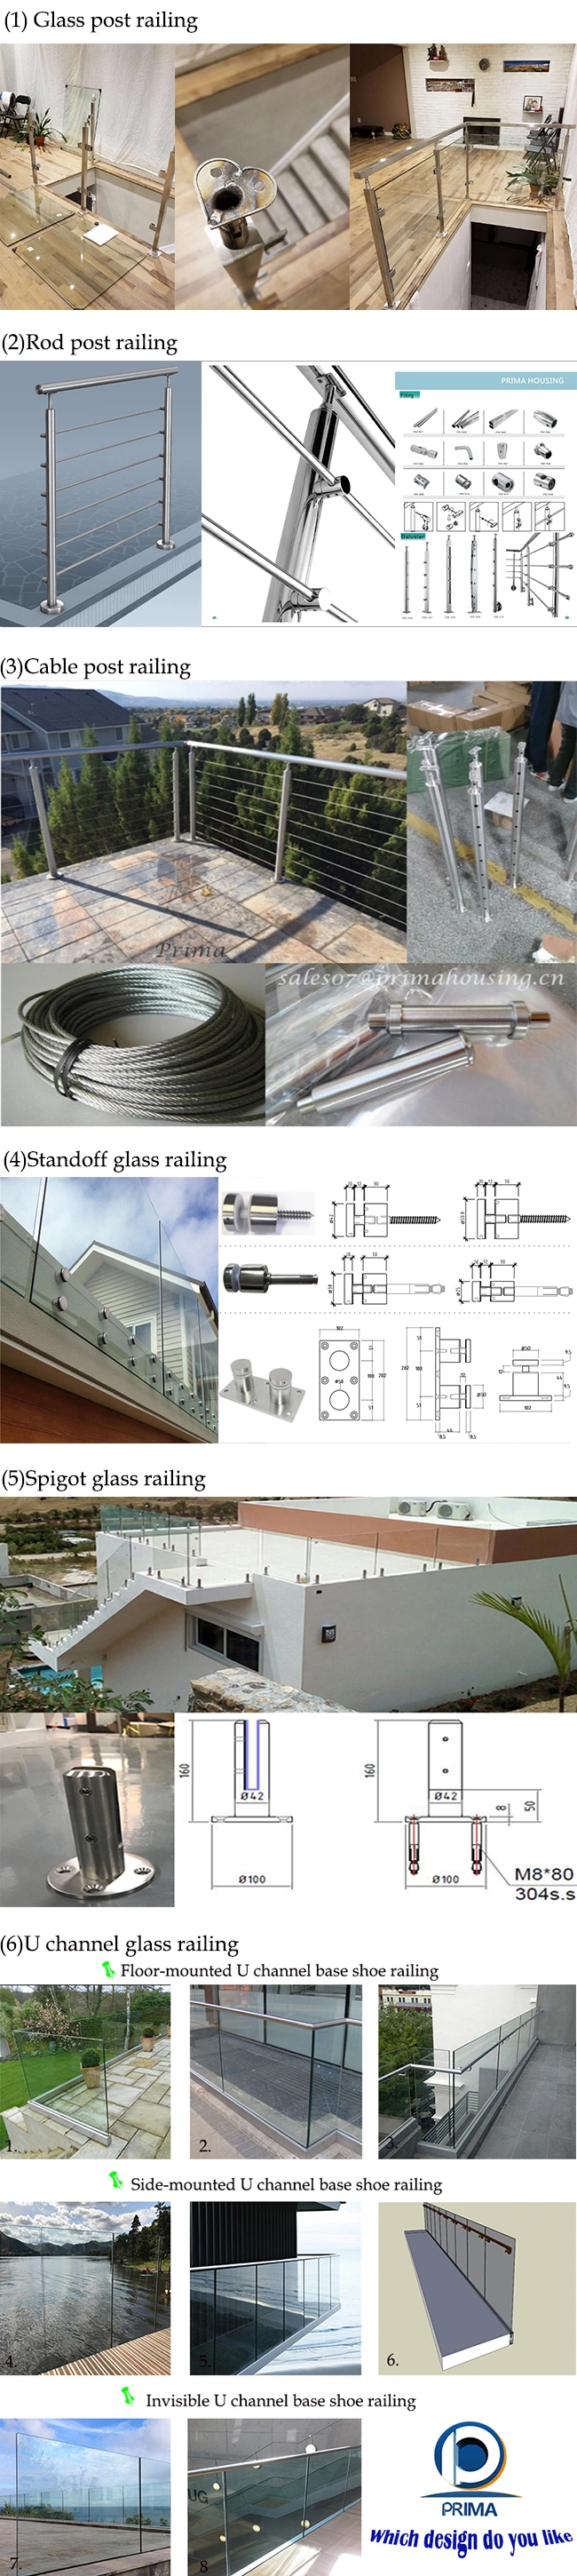 Exterior Balcony Stainless Steel Cable Deck Railing Design/Wire Rope Handrail/Staircase Railing